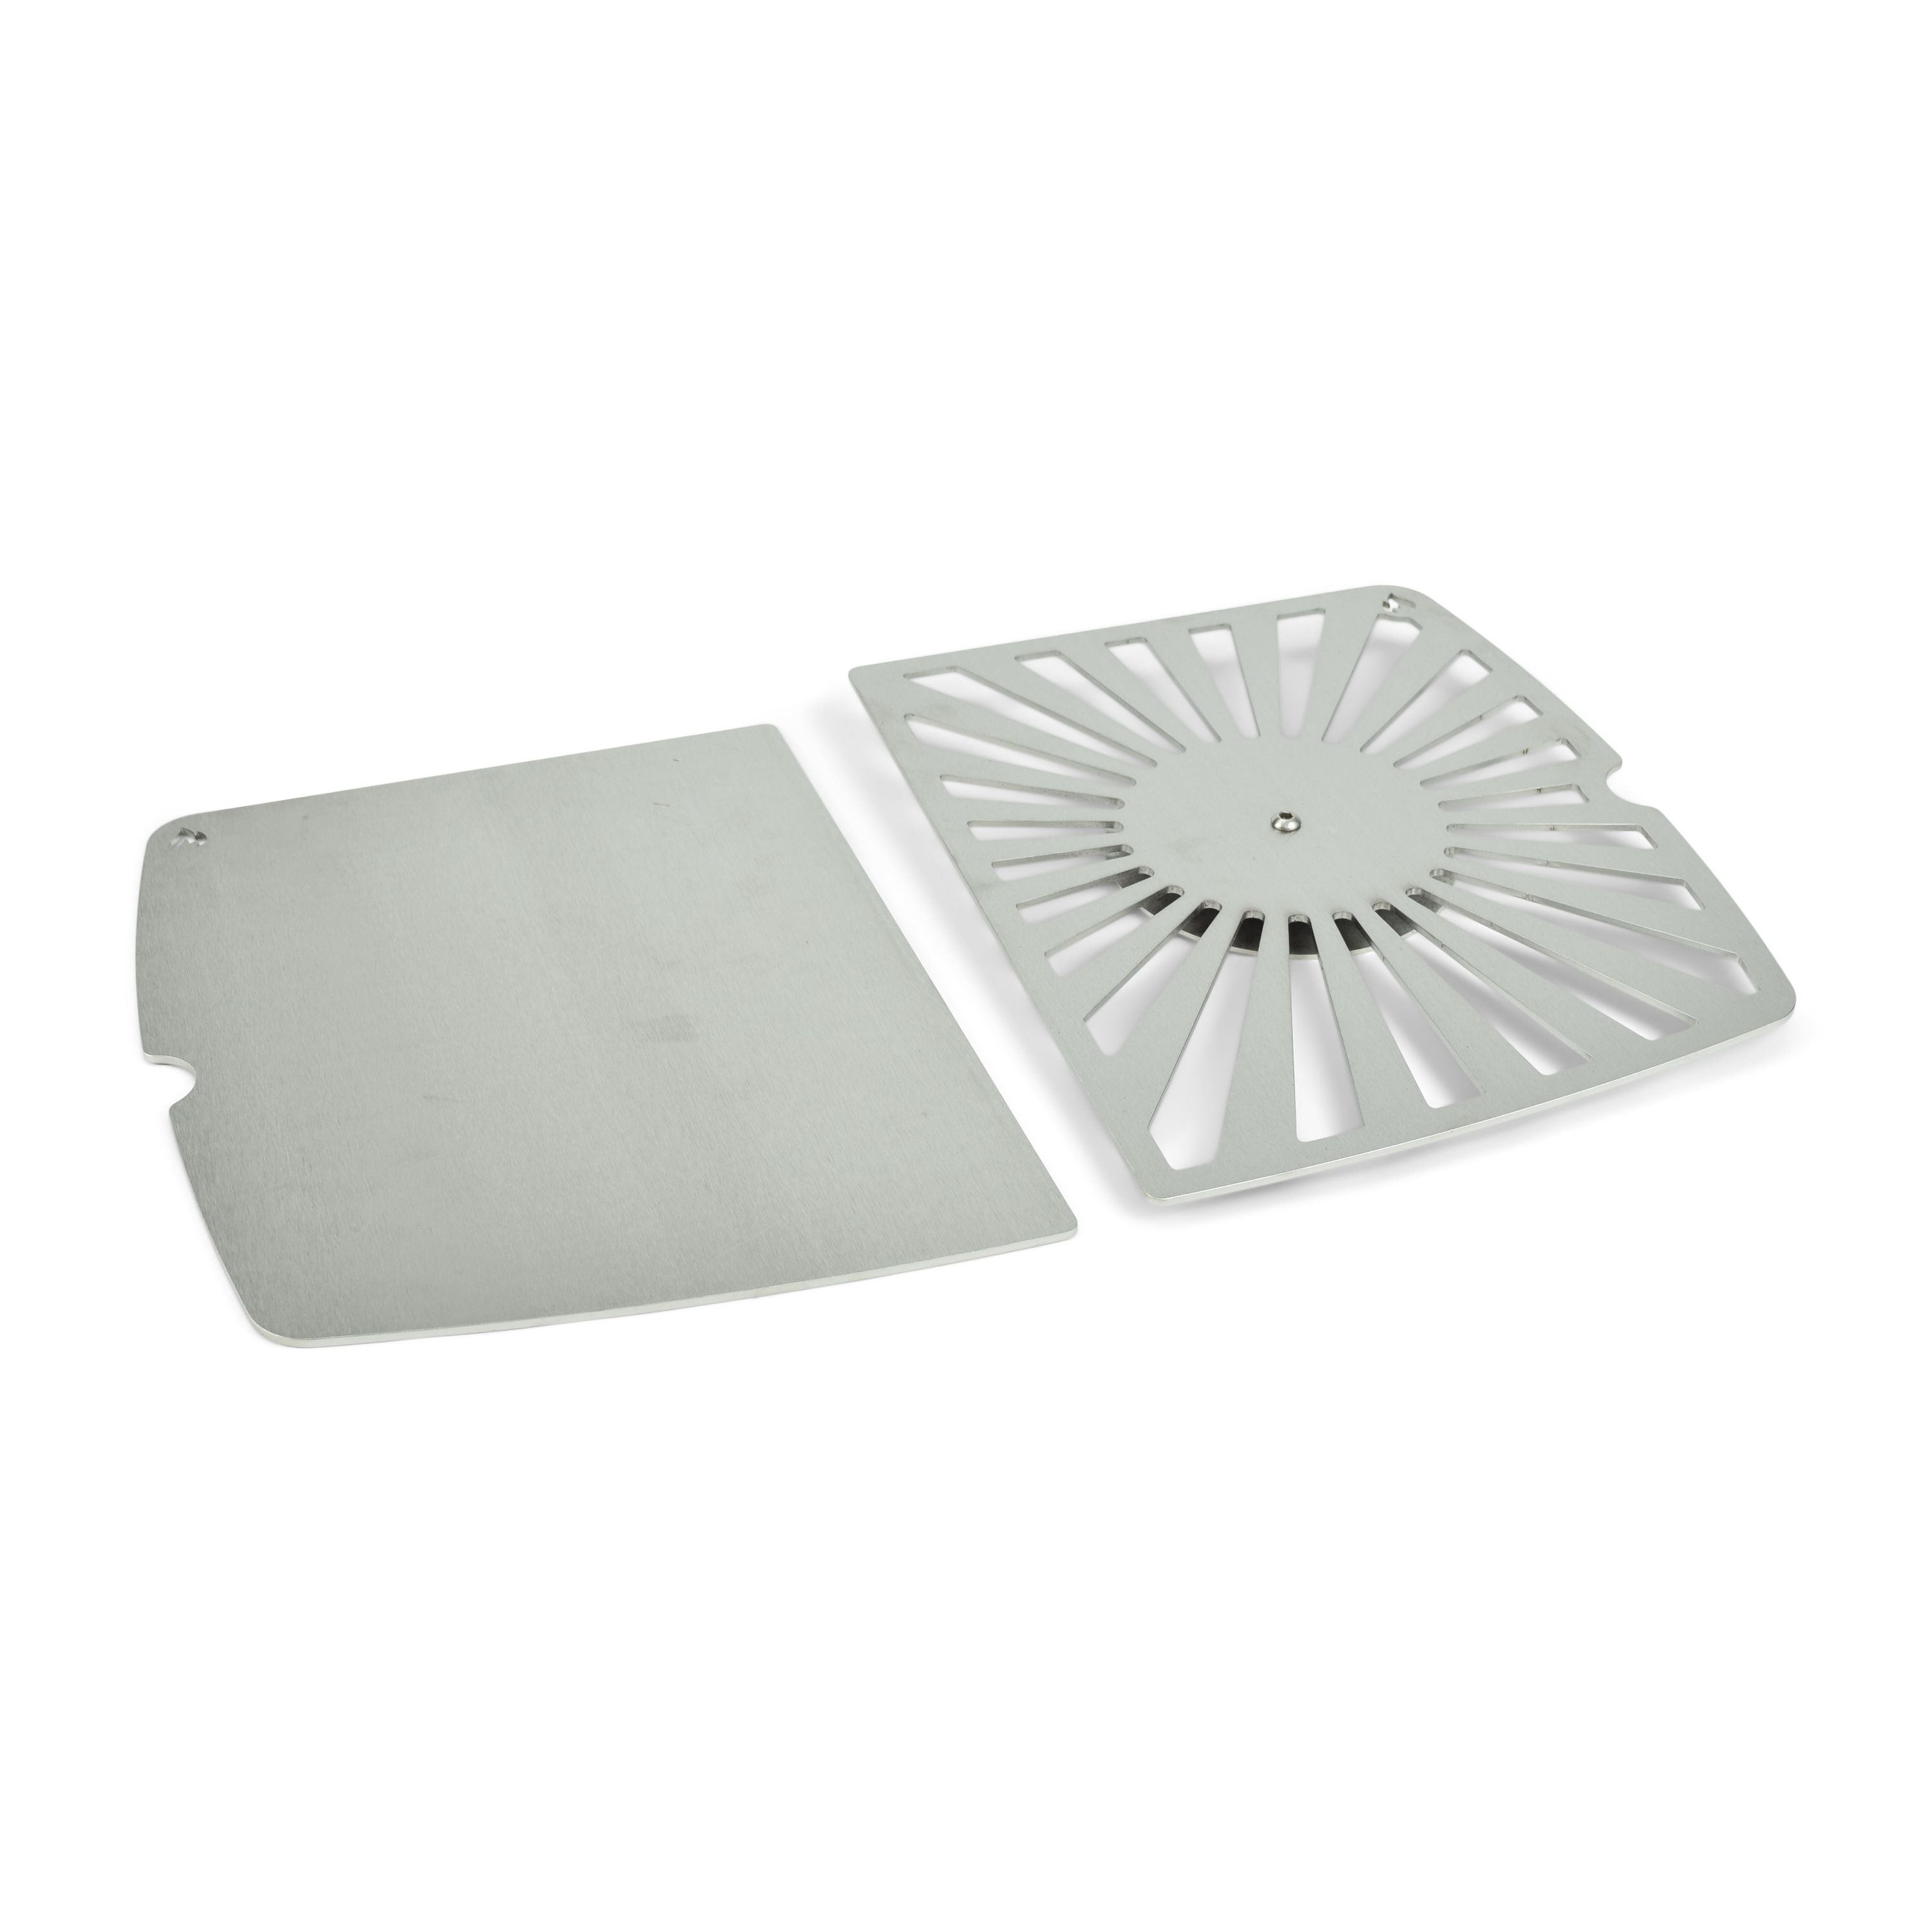 Enders Urban | Explorer Grill Plate Stainless steel plancha